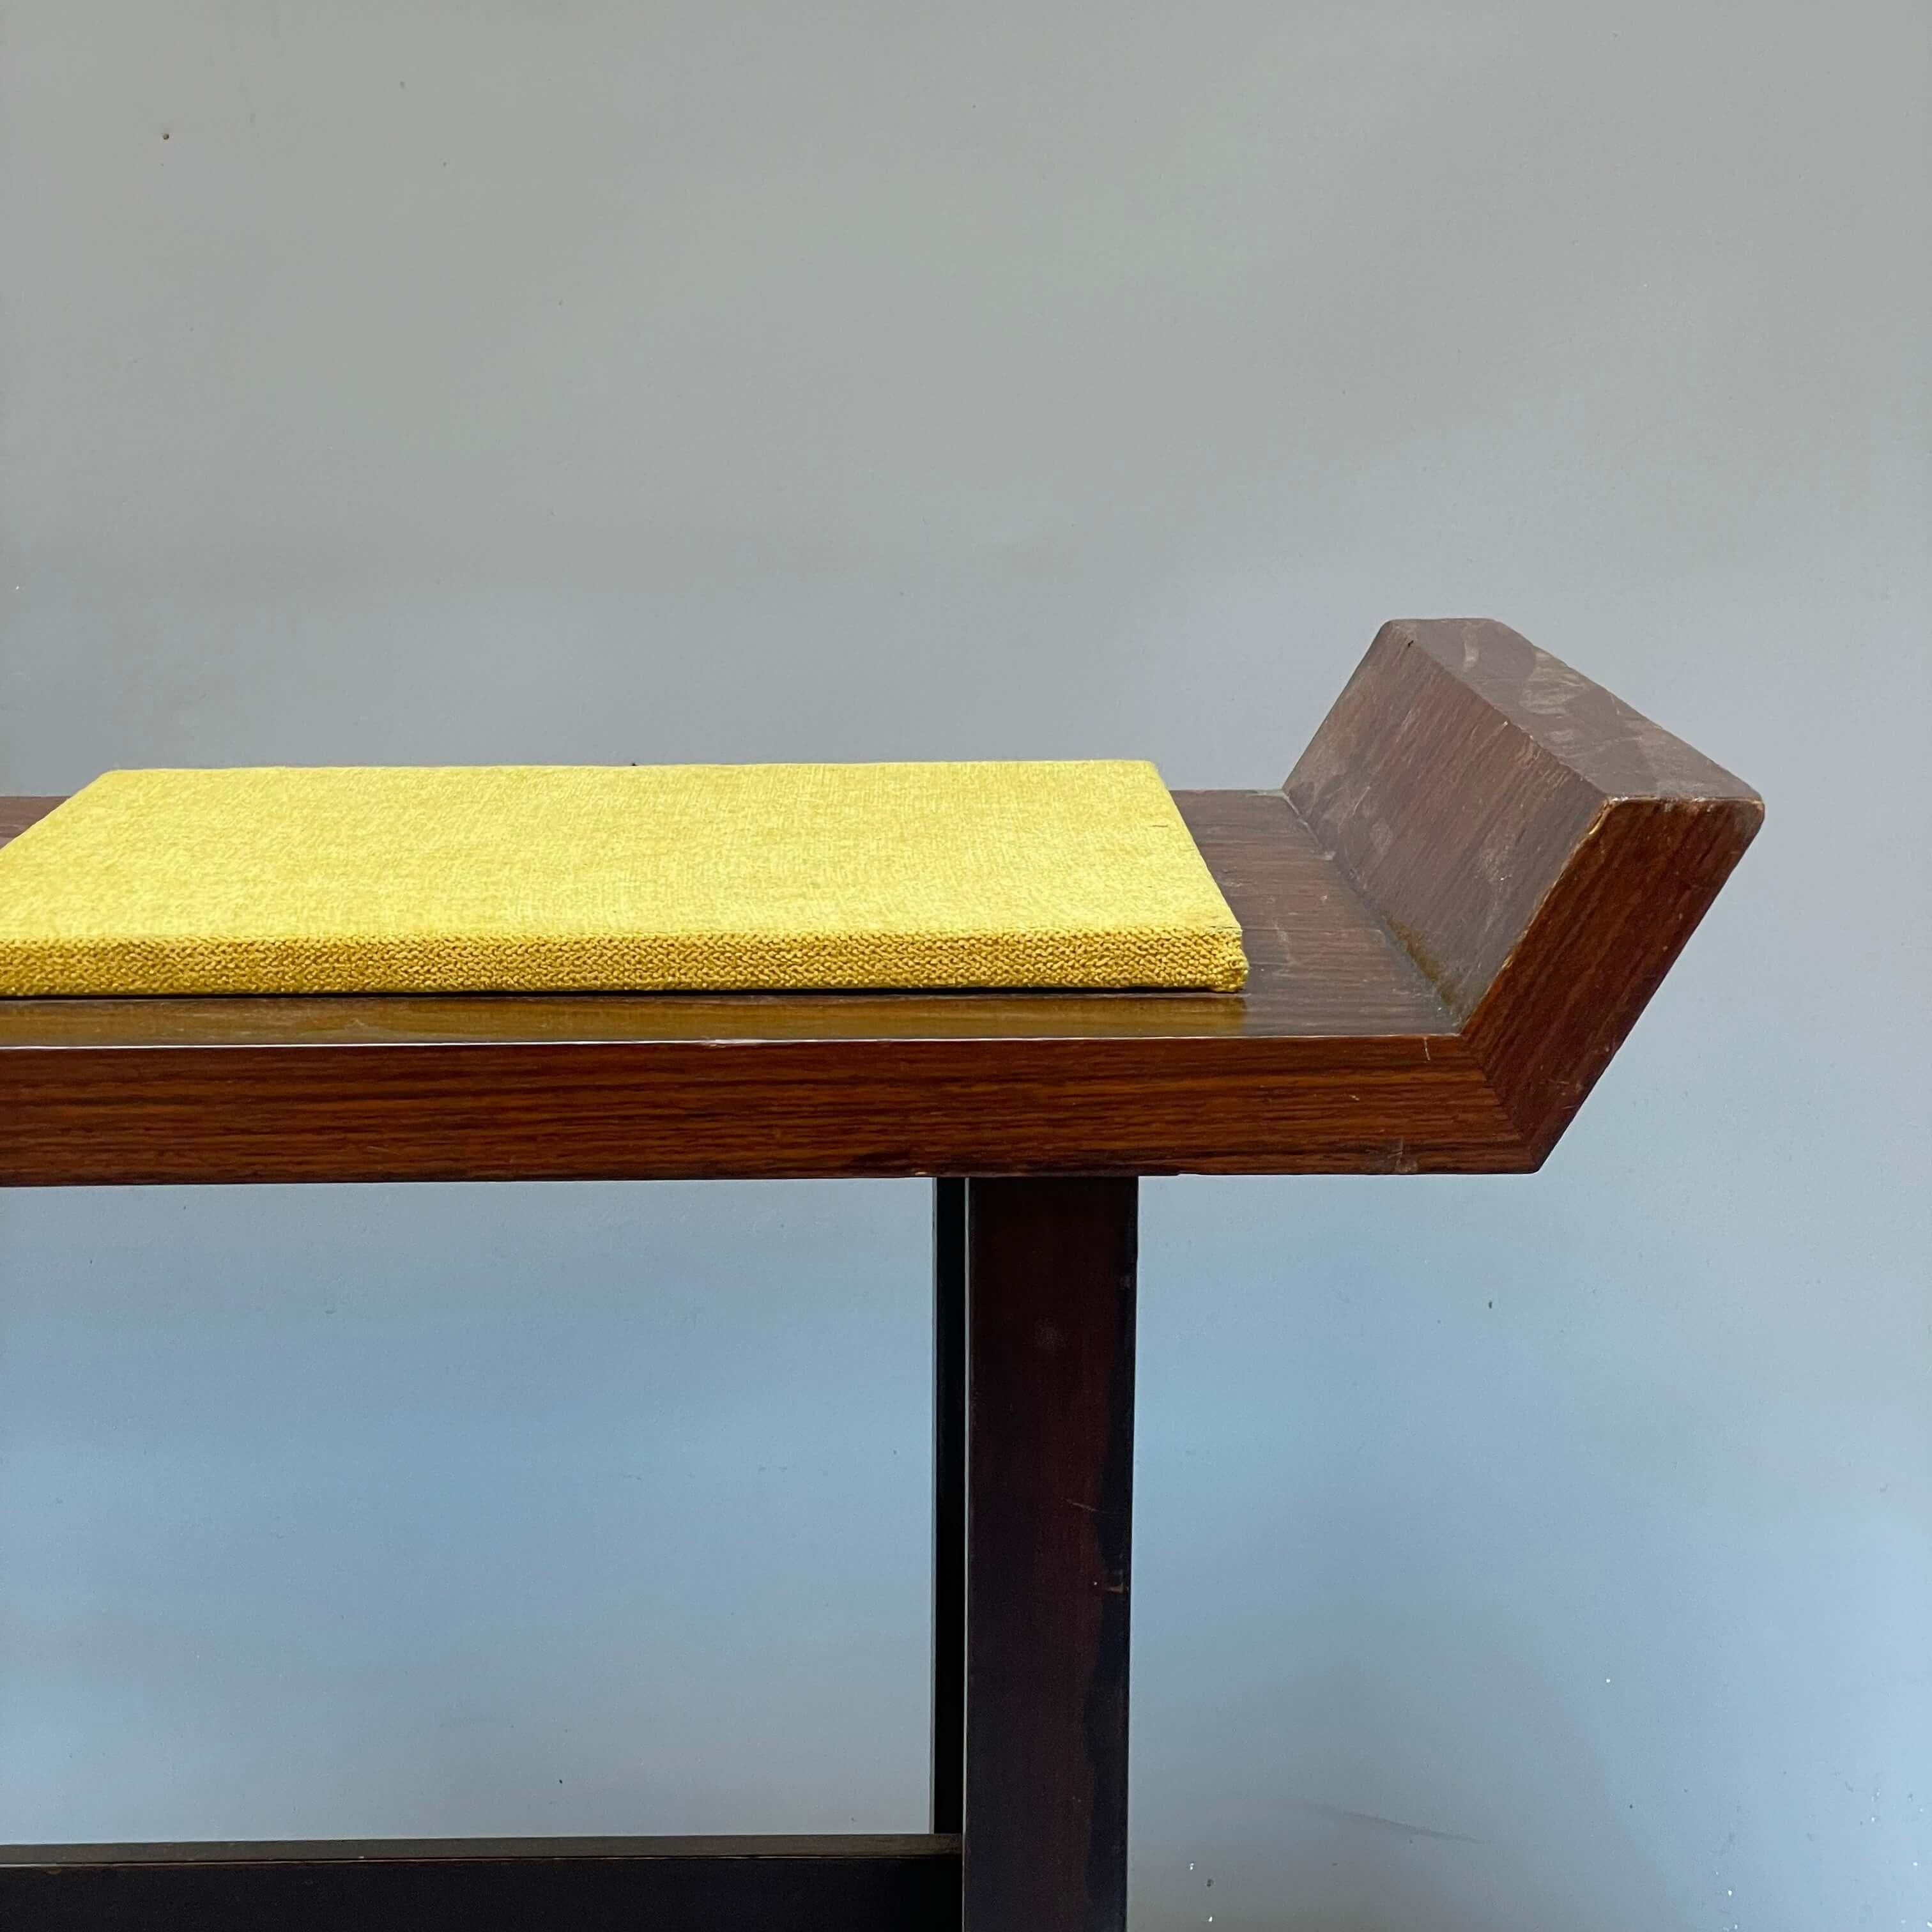 Little bench produced by Poltronova. 1960s design modern and fresh, thanks to the yellow color cushion.